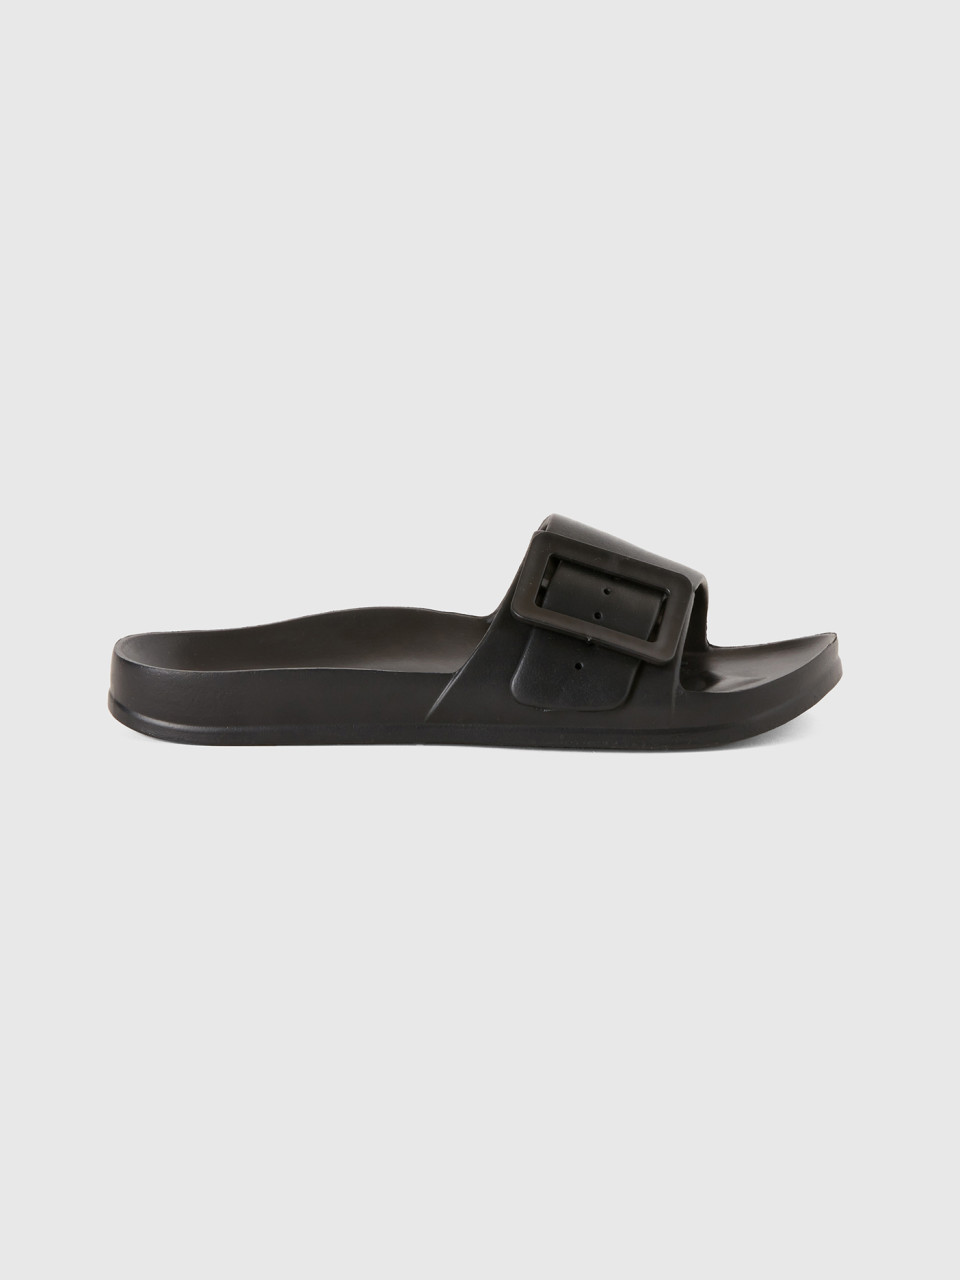 Benetton, Sandals With Band And Buckle,5, Black